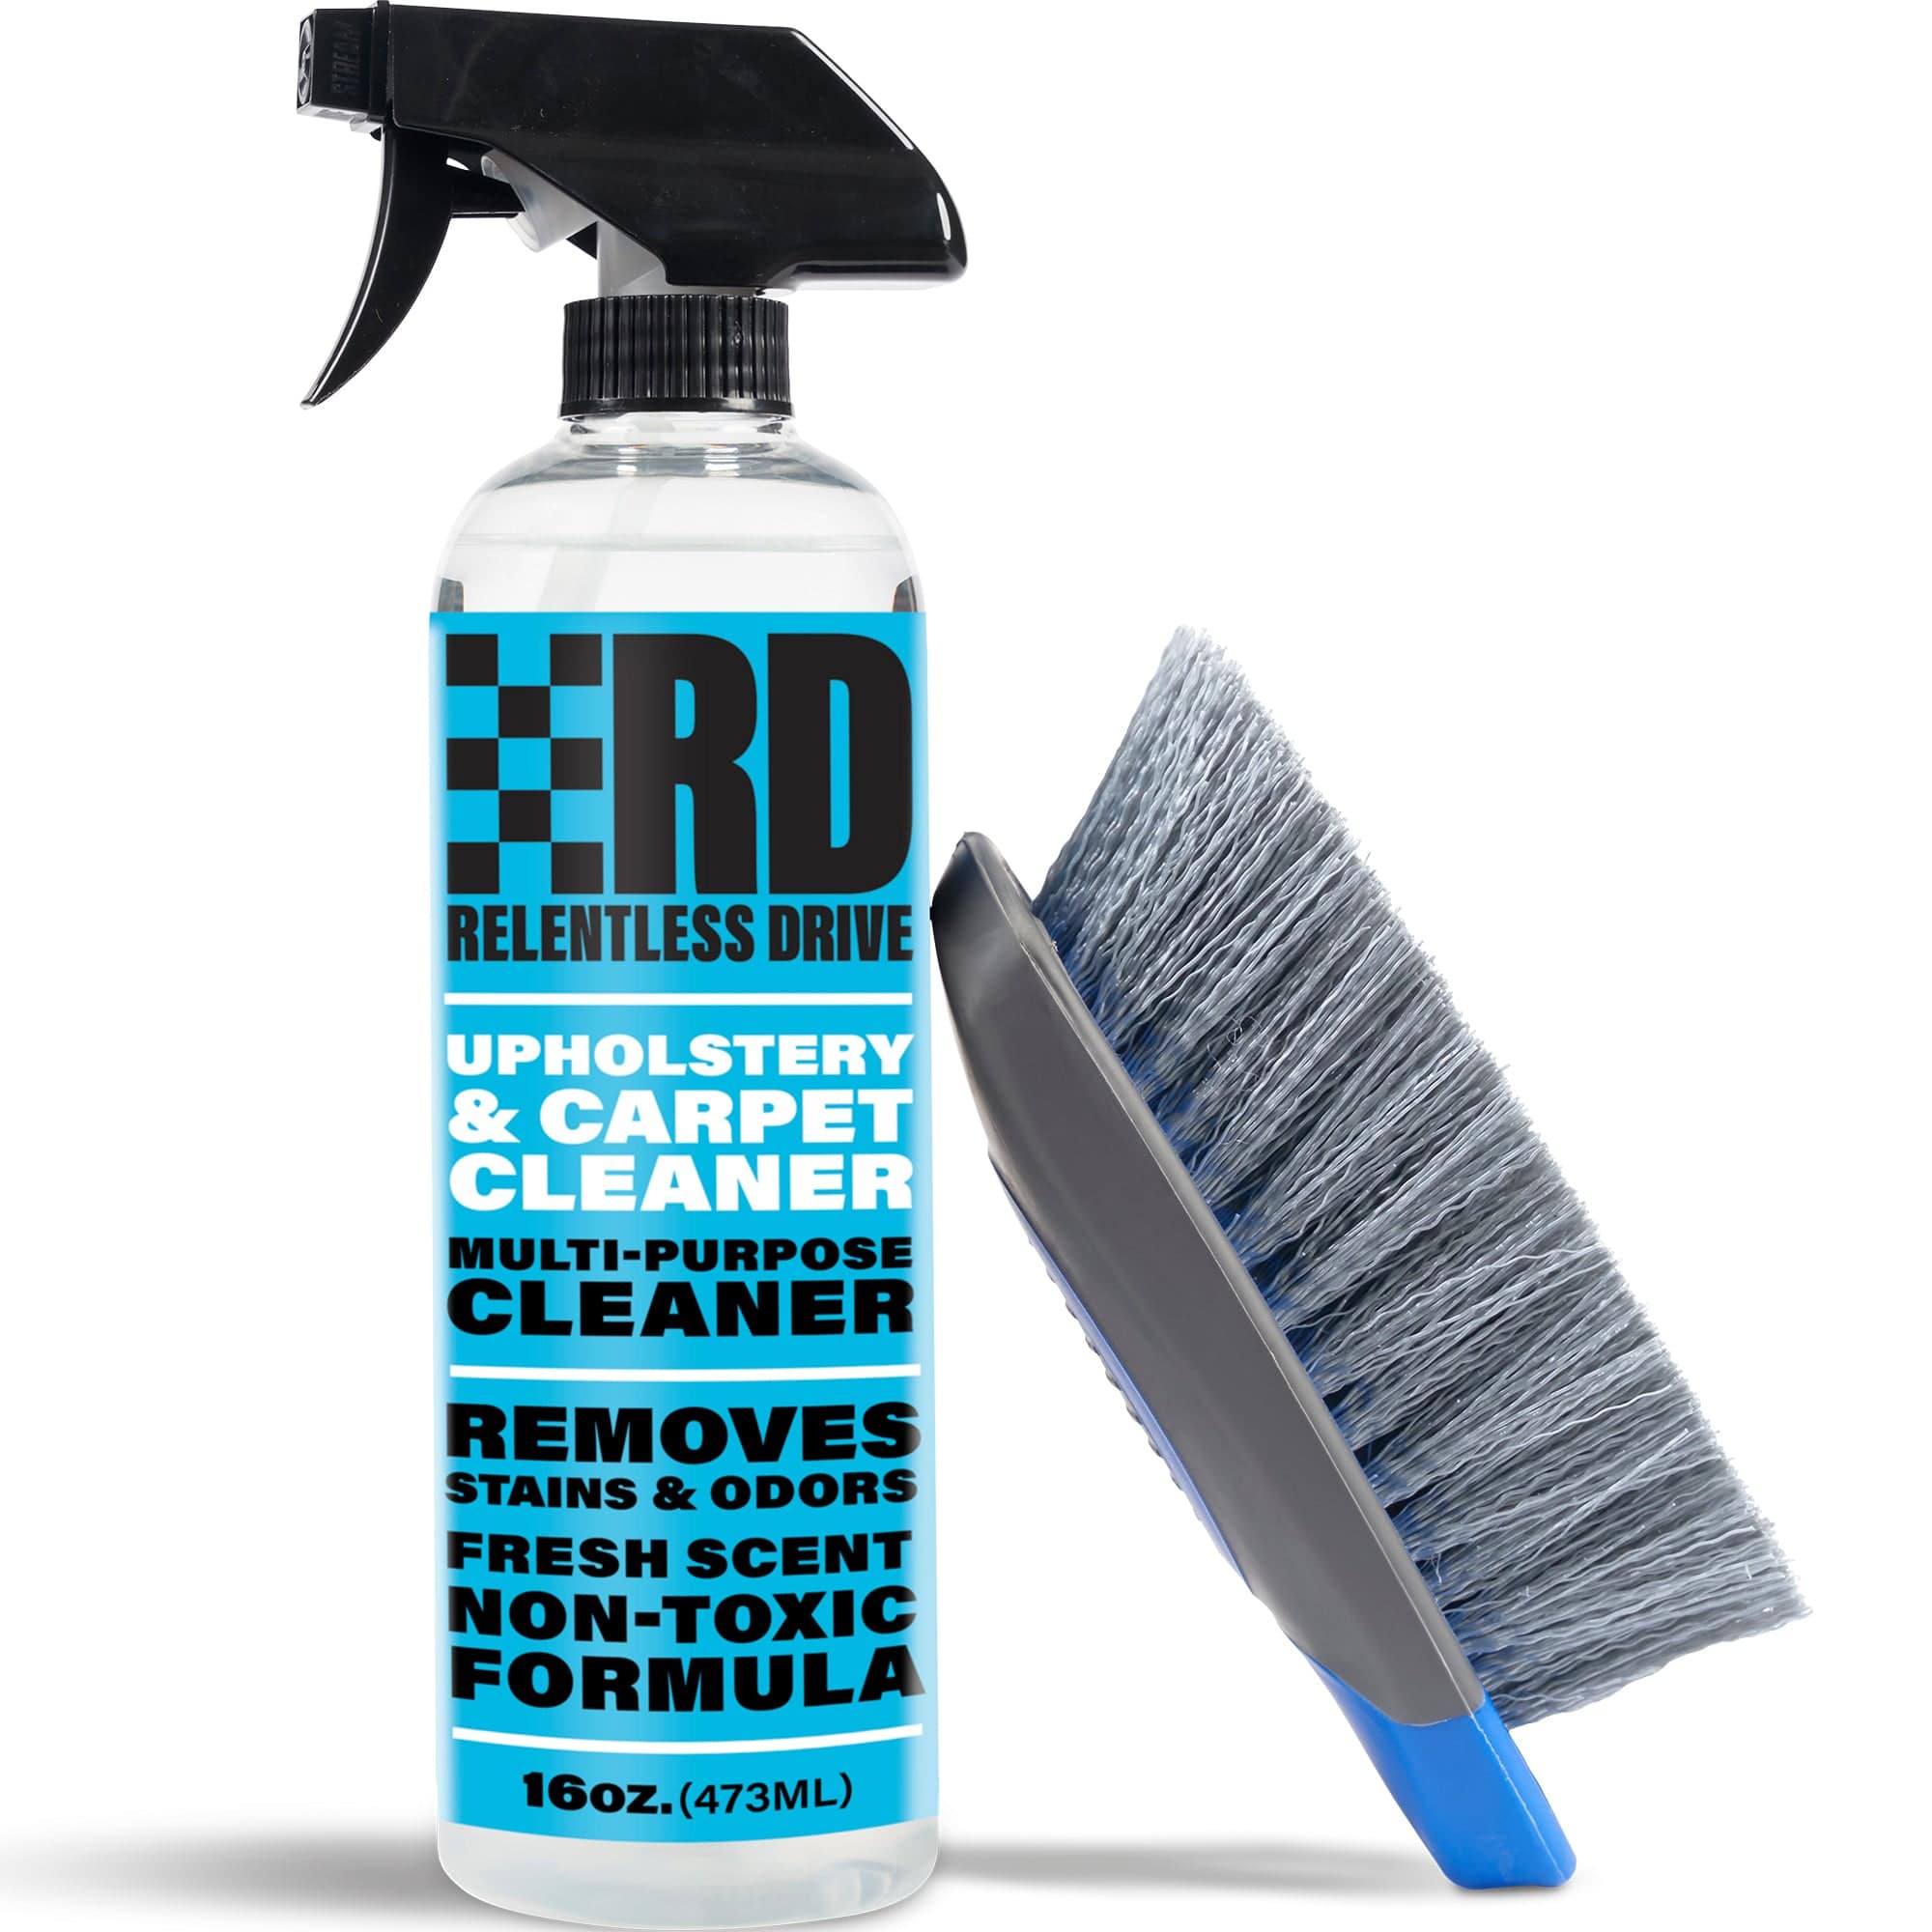 Relentless Drive Car Upholstery Cleaner Kit - Car Seat Cleaner & Car C